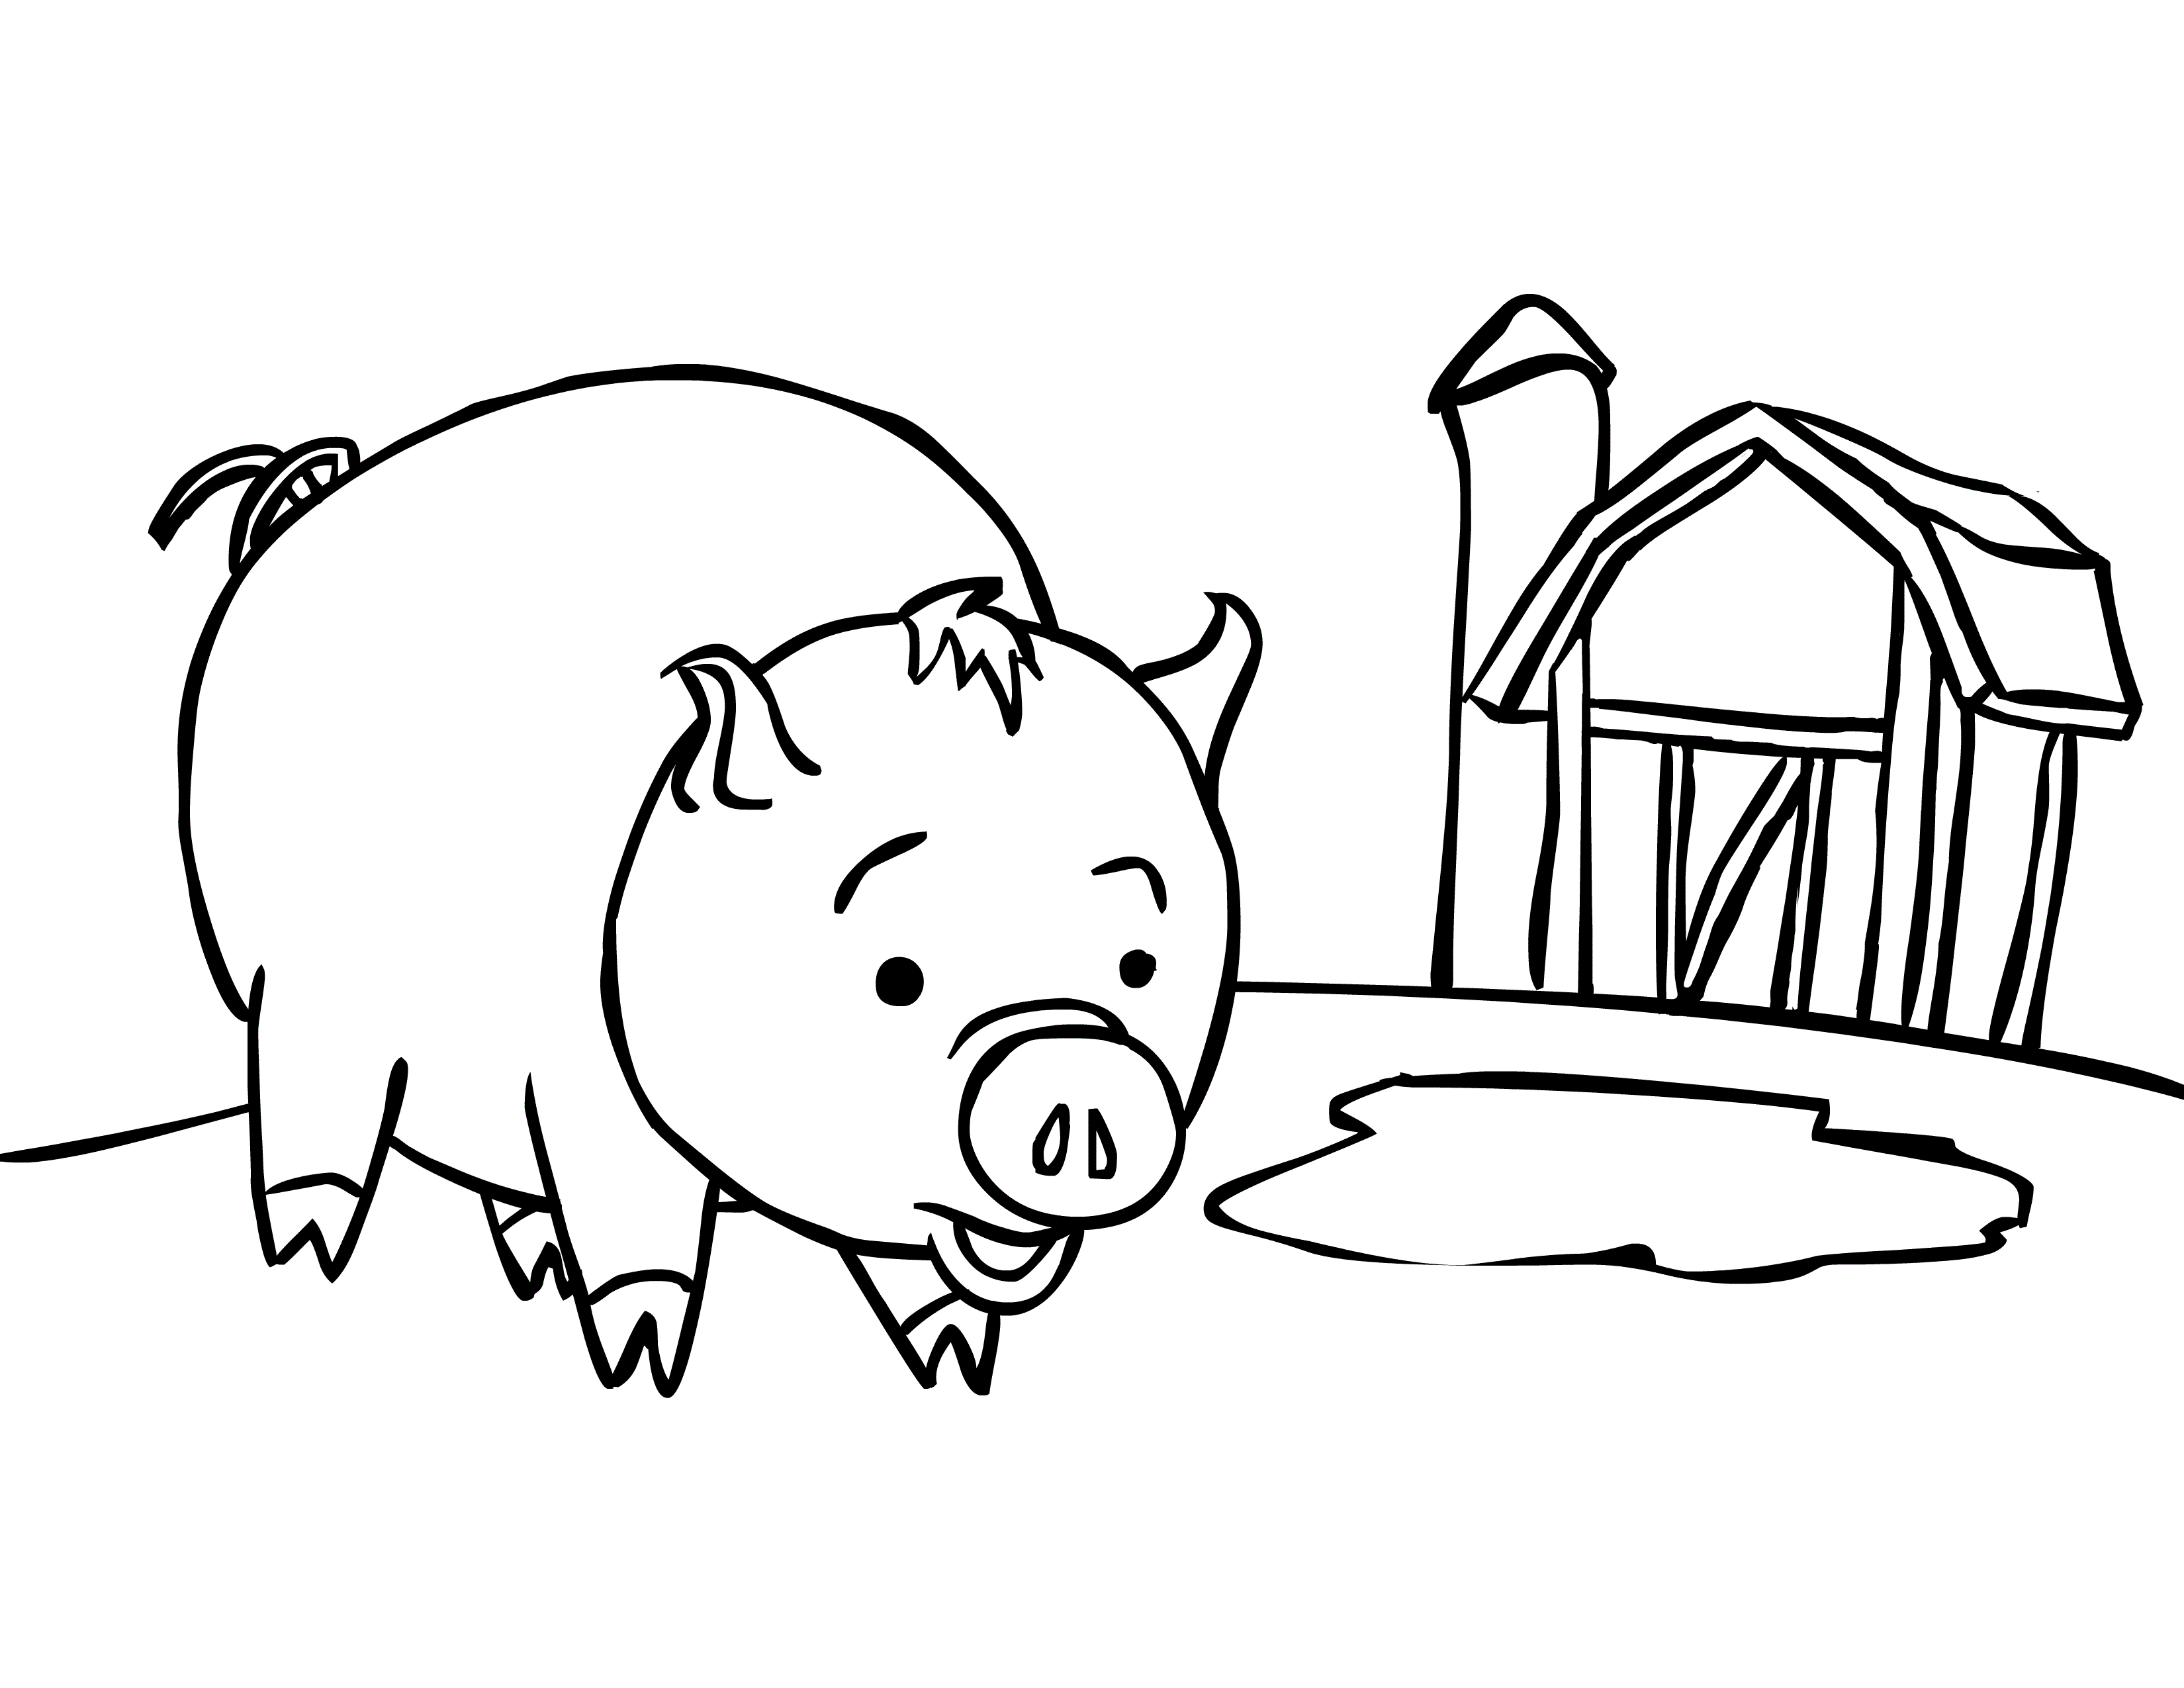 Free Printable Pig Coloring Pages For Kids Coloring Wallpapers Download Free Images Wallpaper [coloring436.blogspot.com]